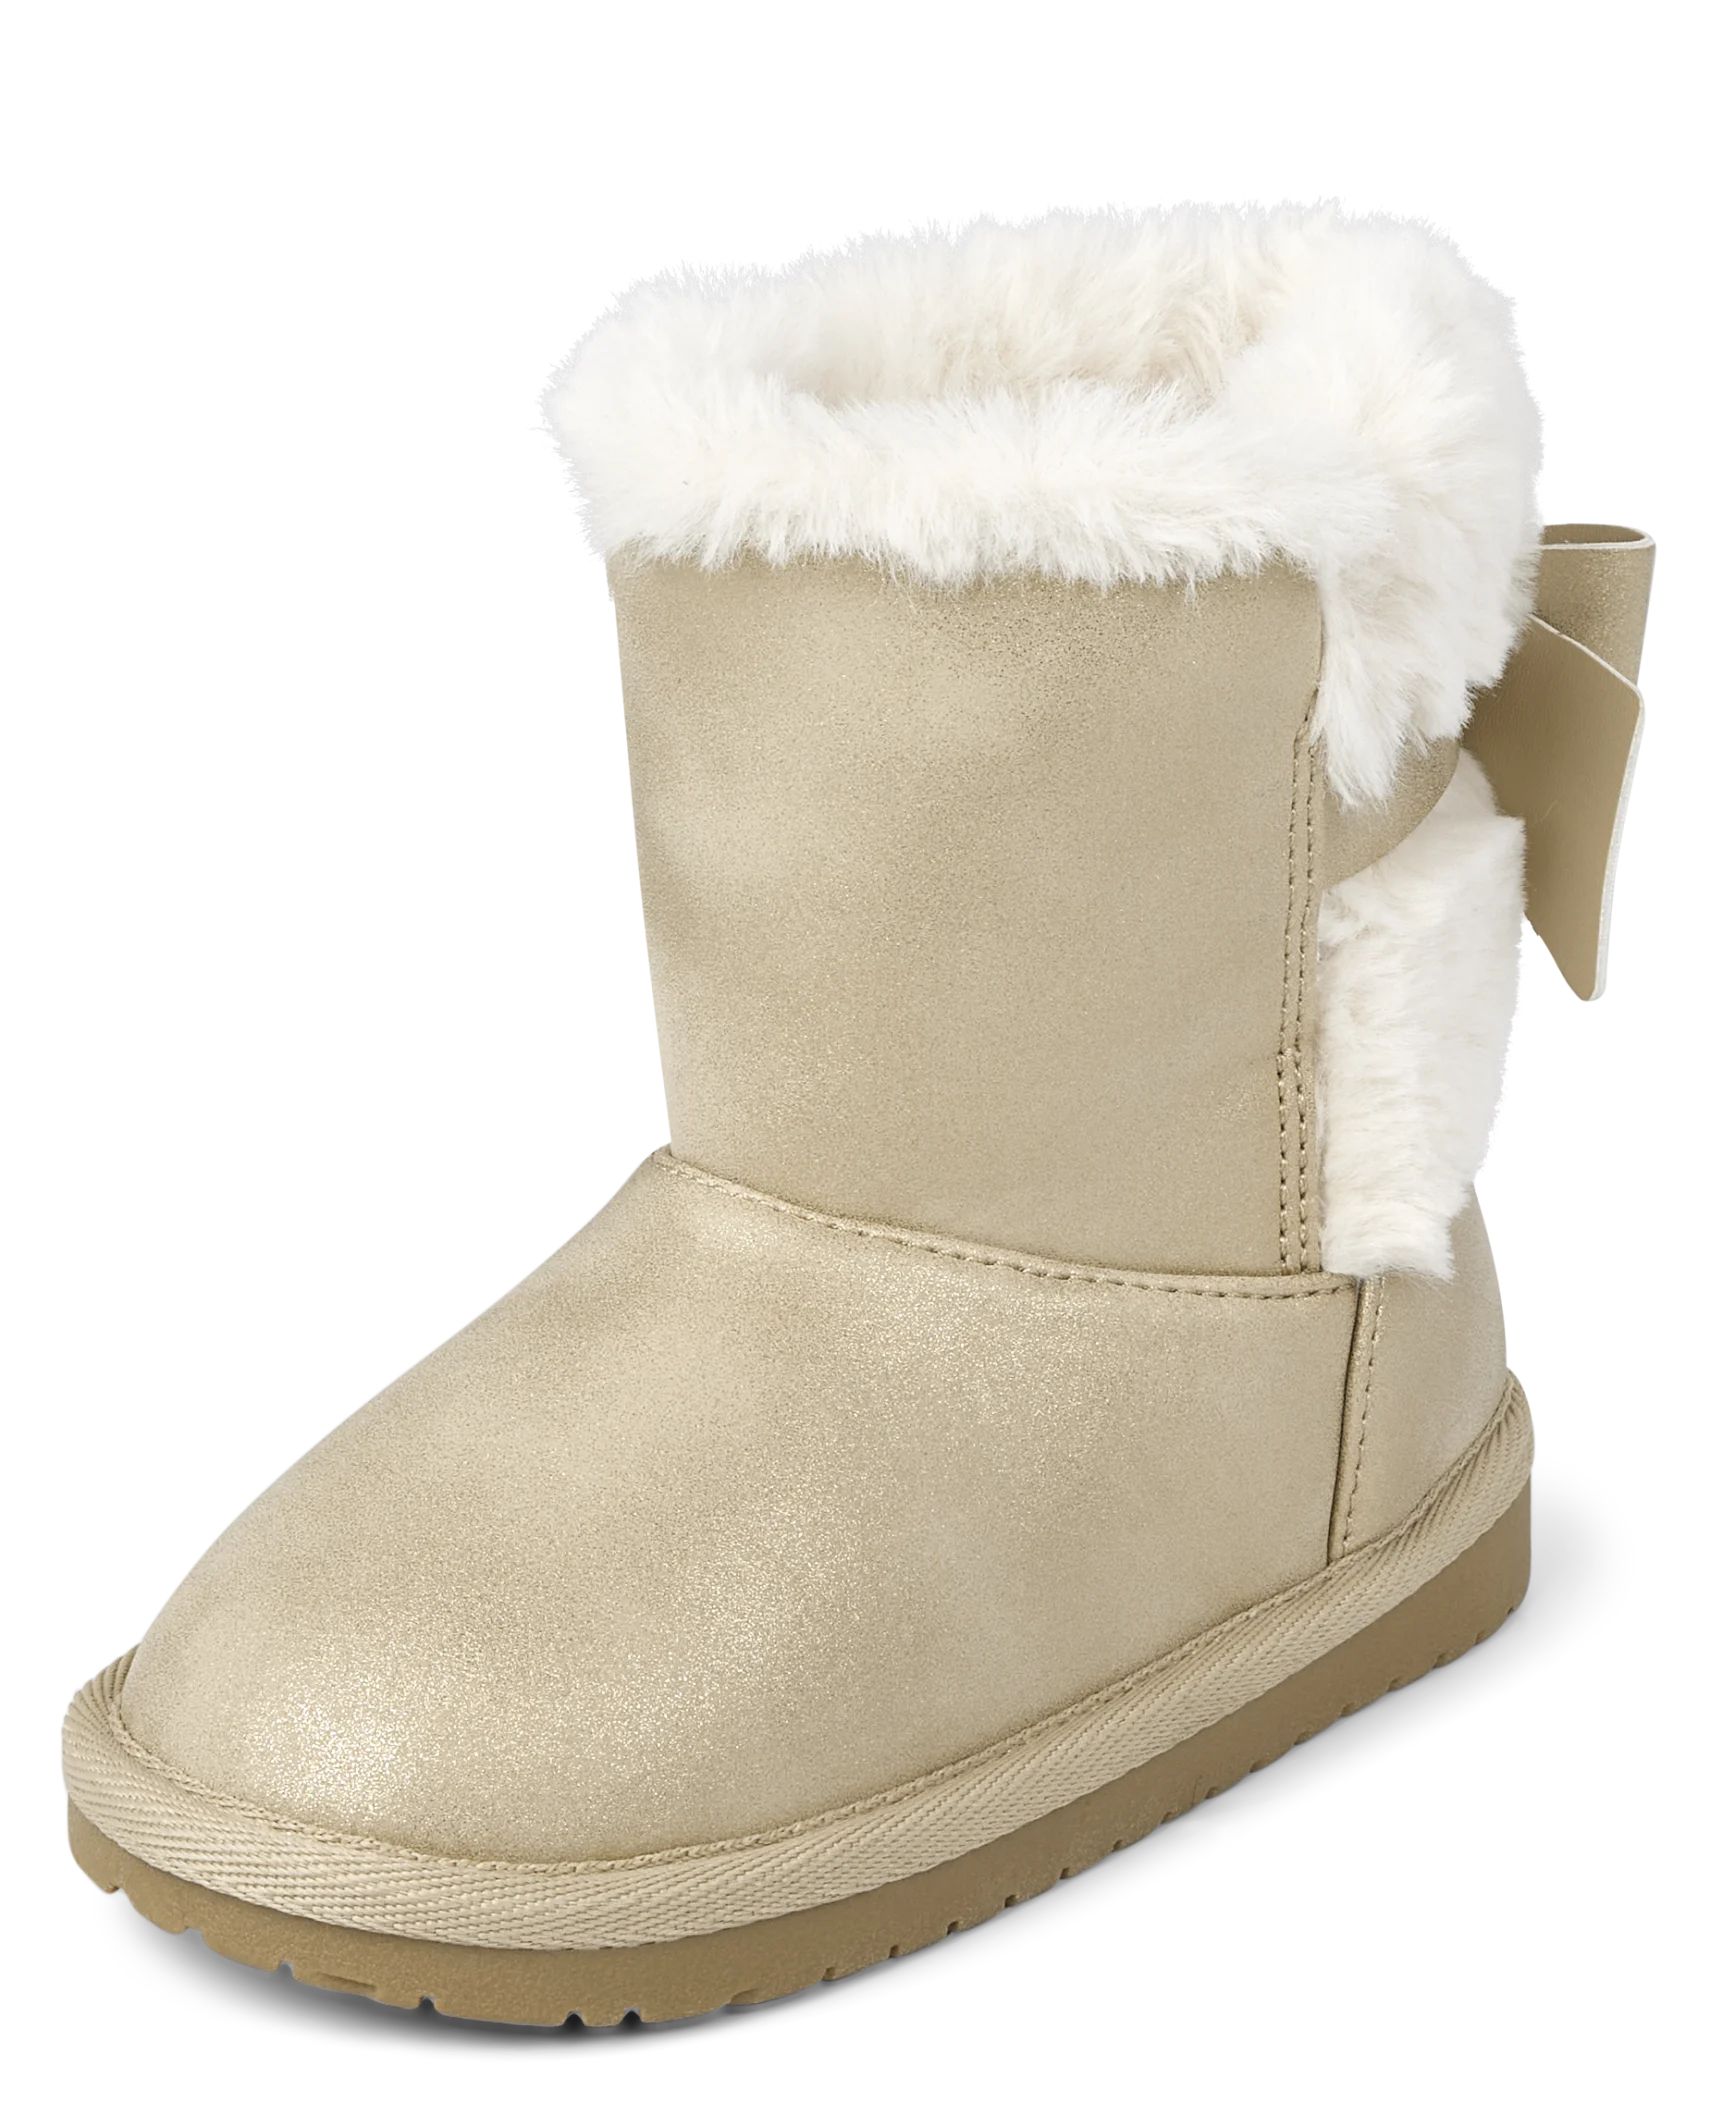 Toddler Girls Shimmer Bow Chalet Boots - gold | The Children's Place